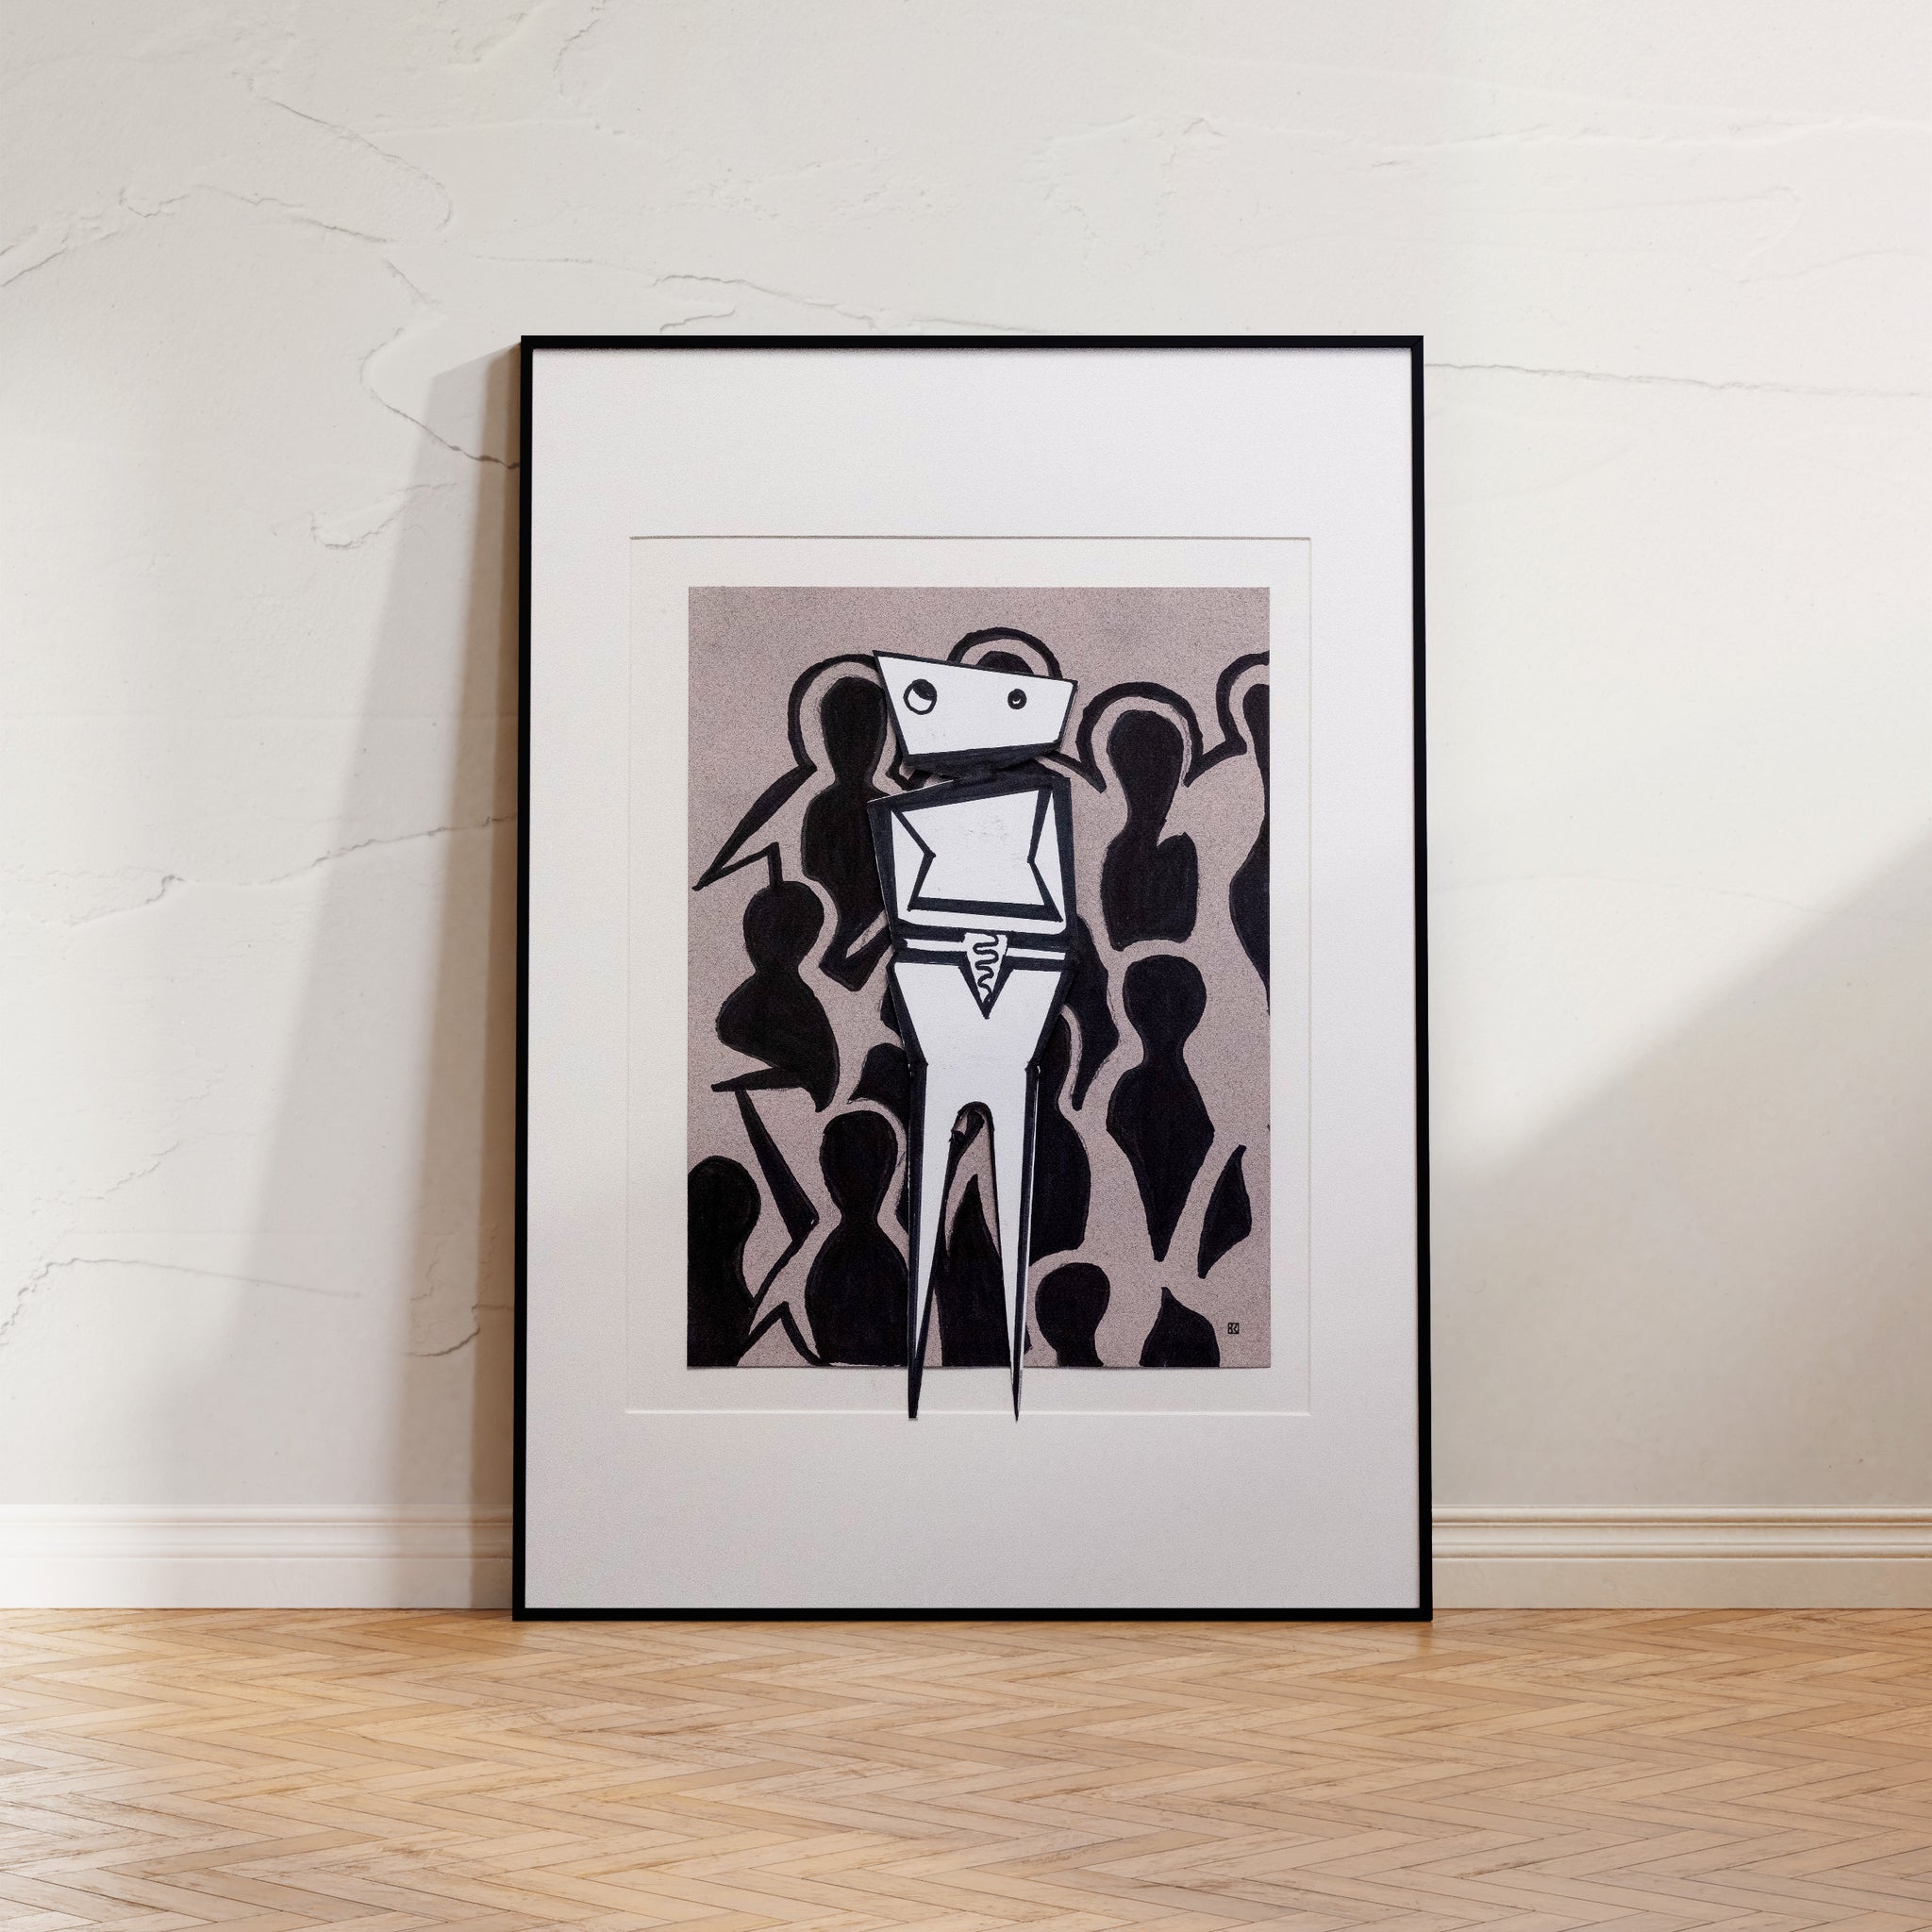 Black and white art deco-cubist woodcut print, 'Gazing Outward' by Brian Findleton, portraying a stylized, introspective figure against a black backdrop.